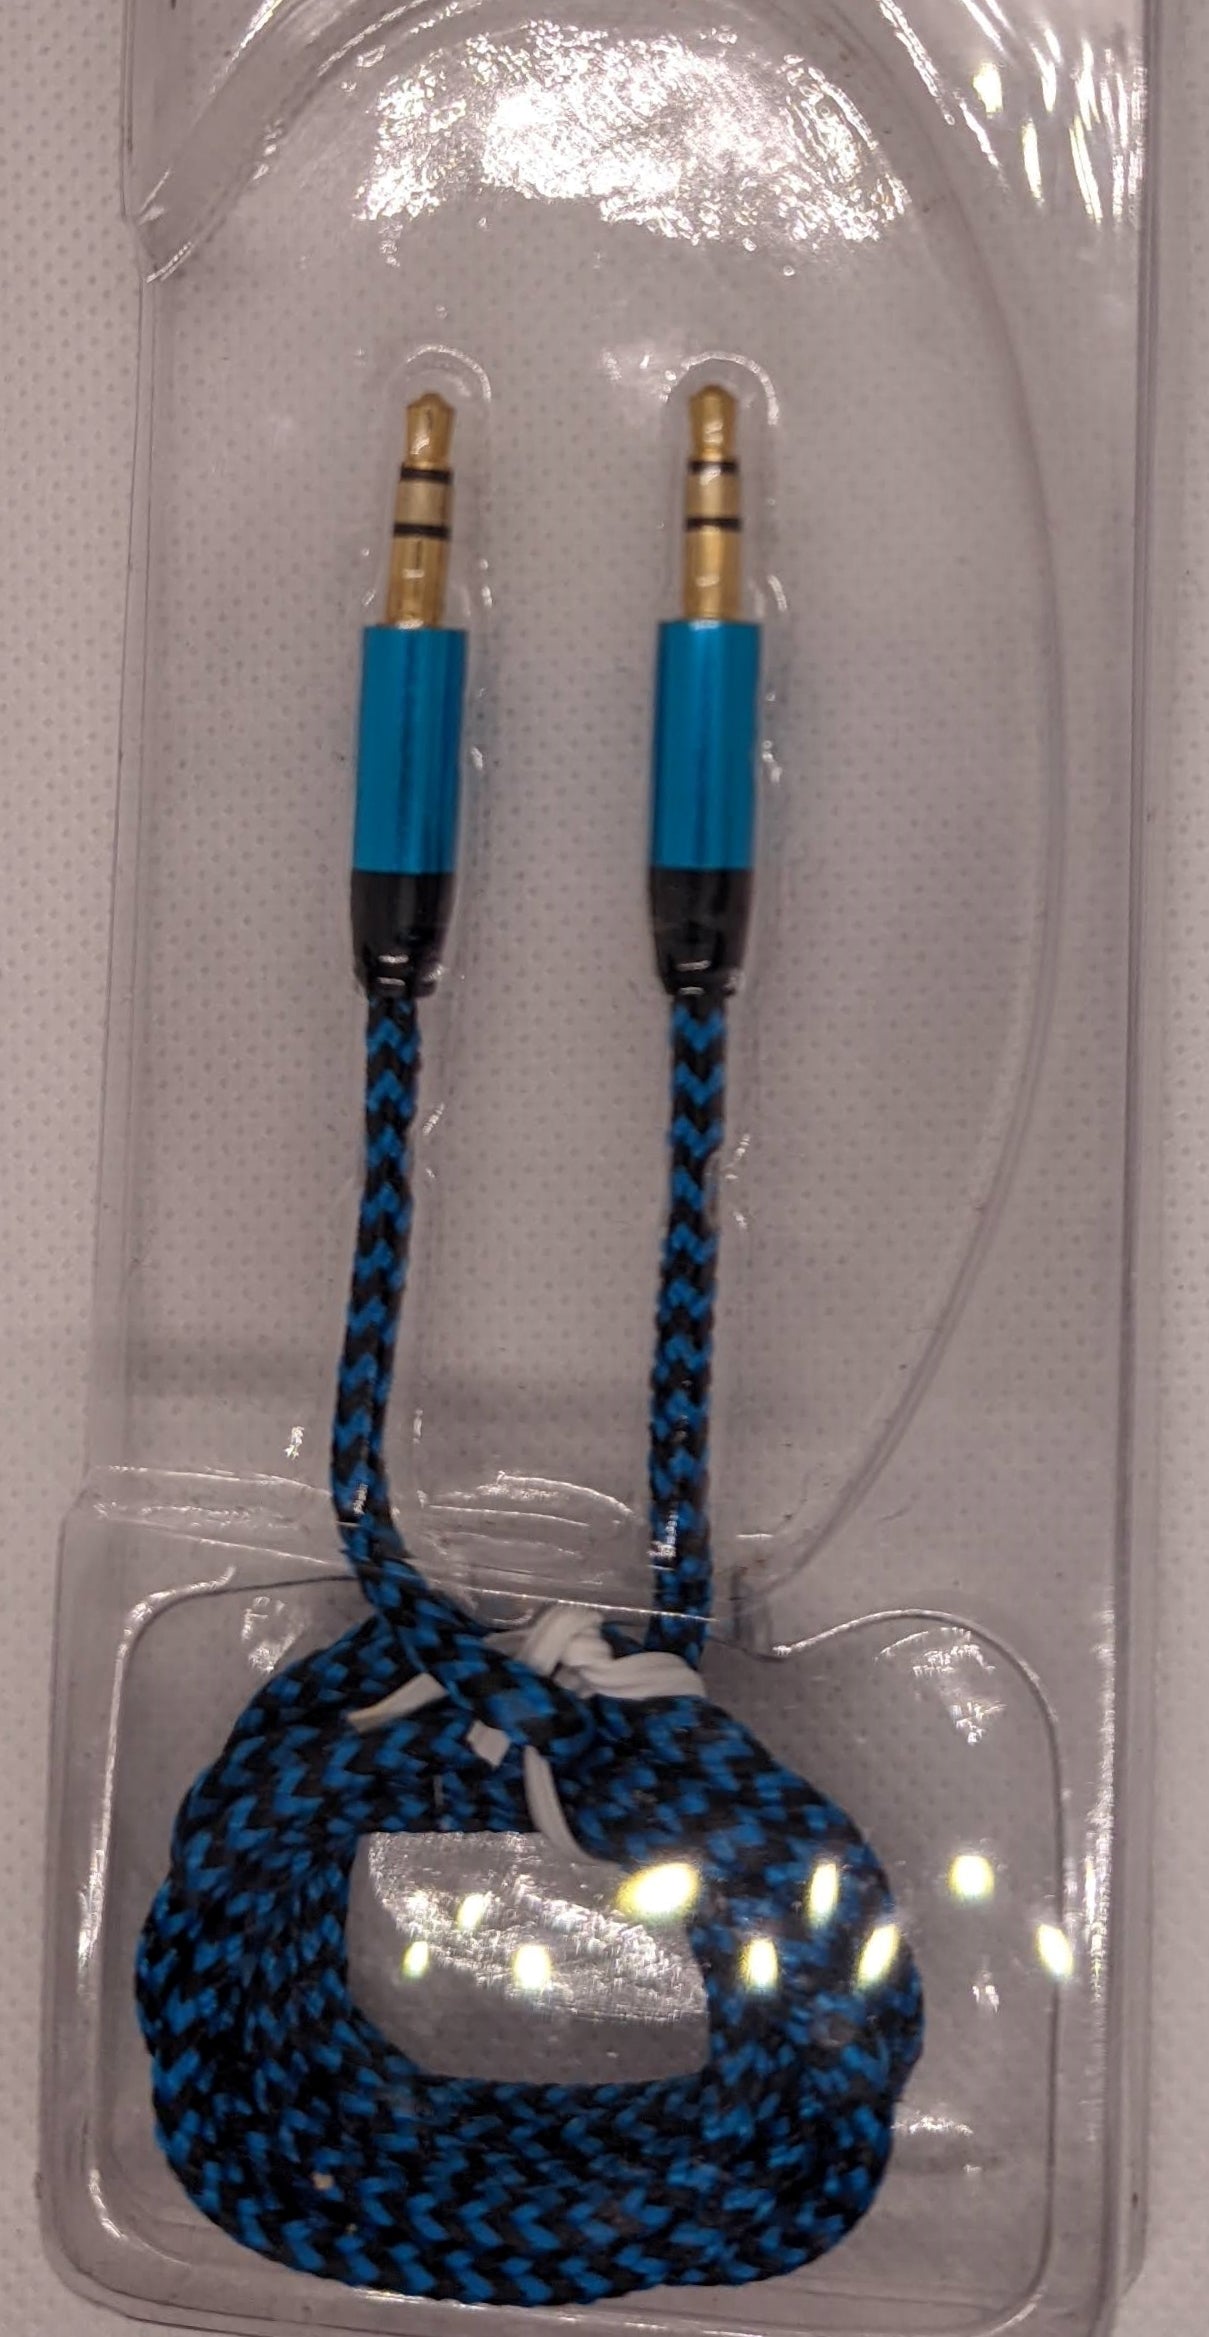 3.5mm to 3.5mm Auxiliary Cable